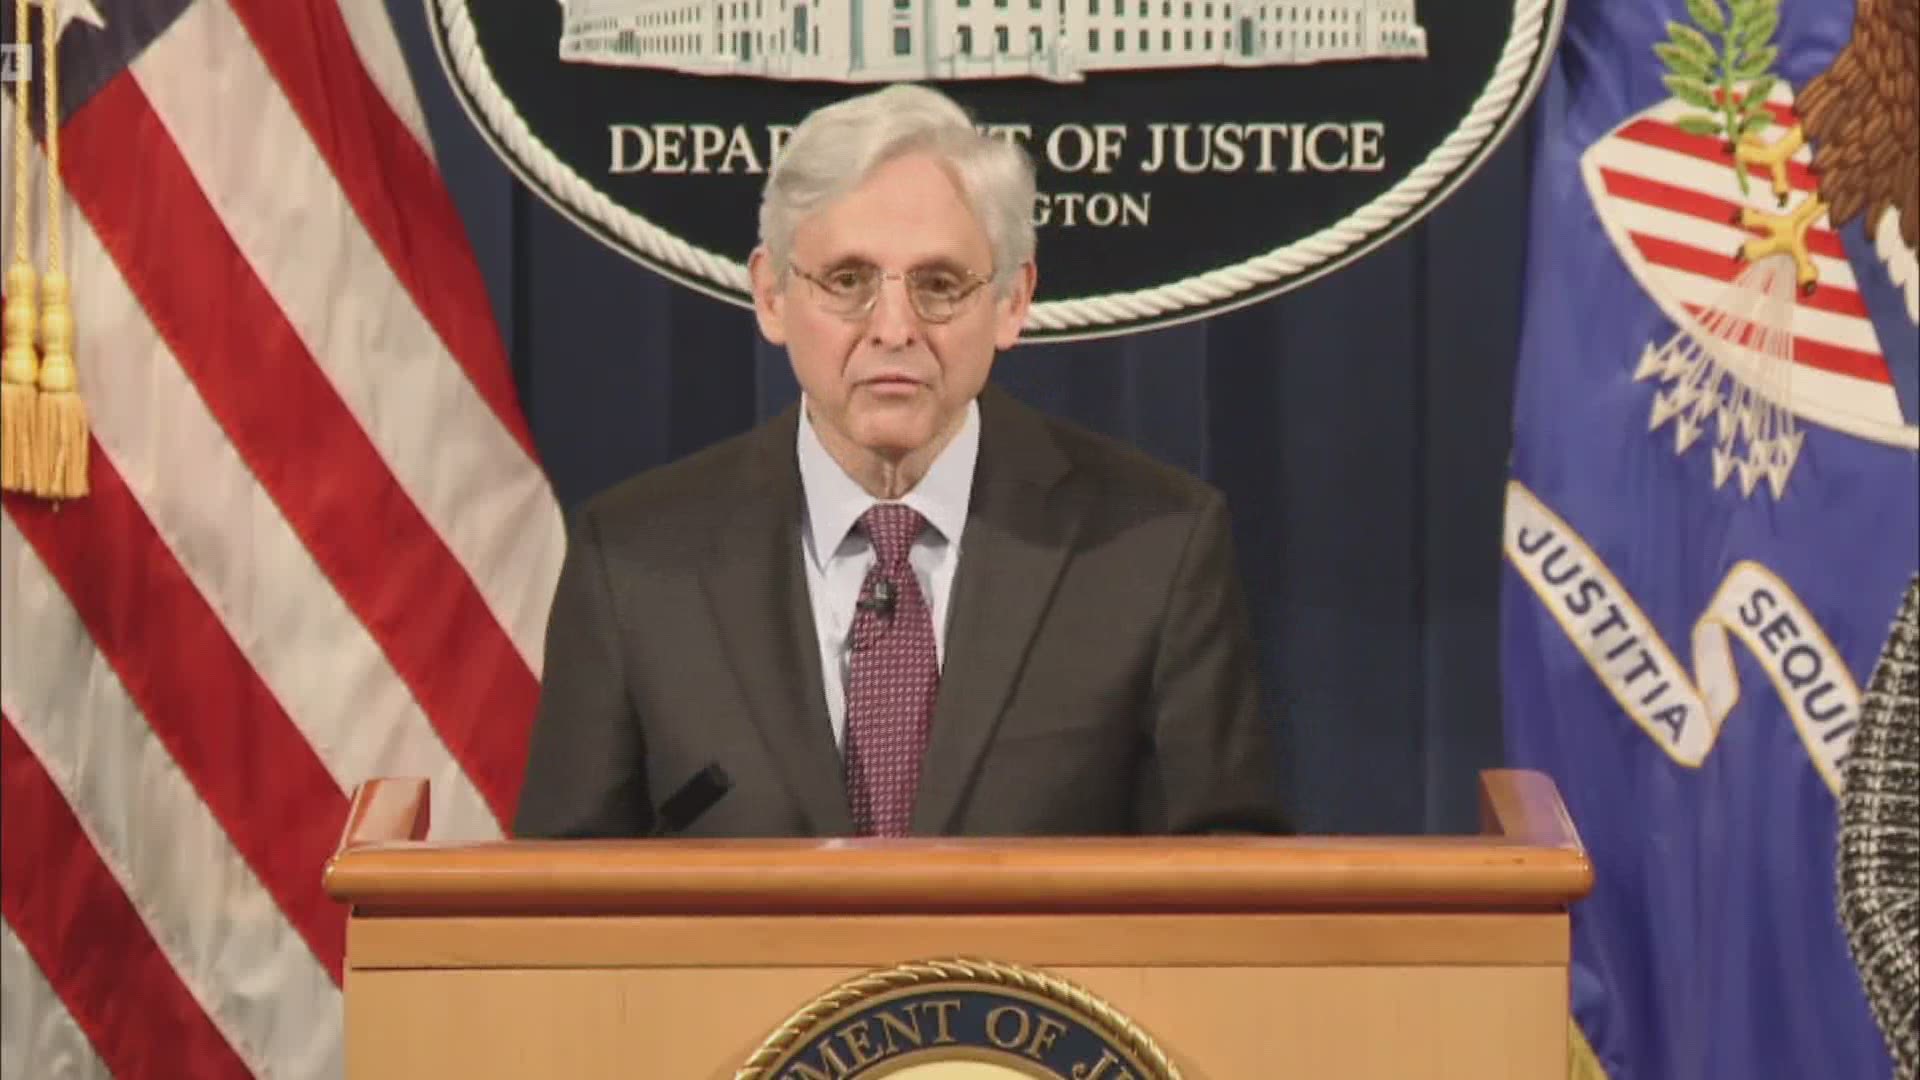 US Attorney General Merrick Garland said the DOJ will investigate whether there is a pattern or practice of unconstitutional or unlawful policing at LMPD.